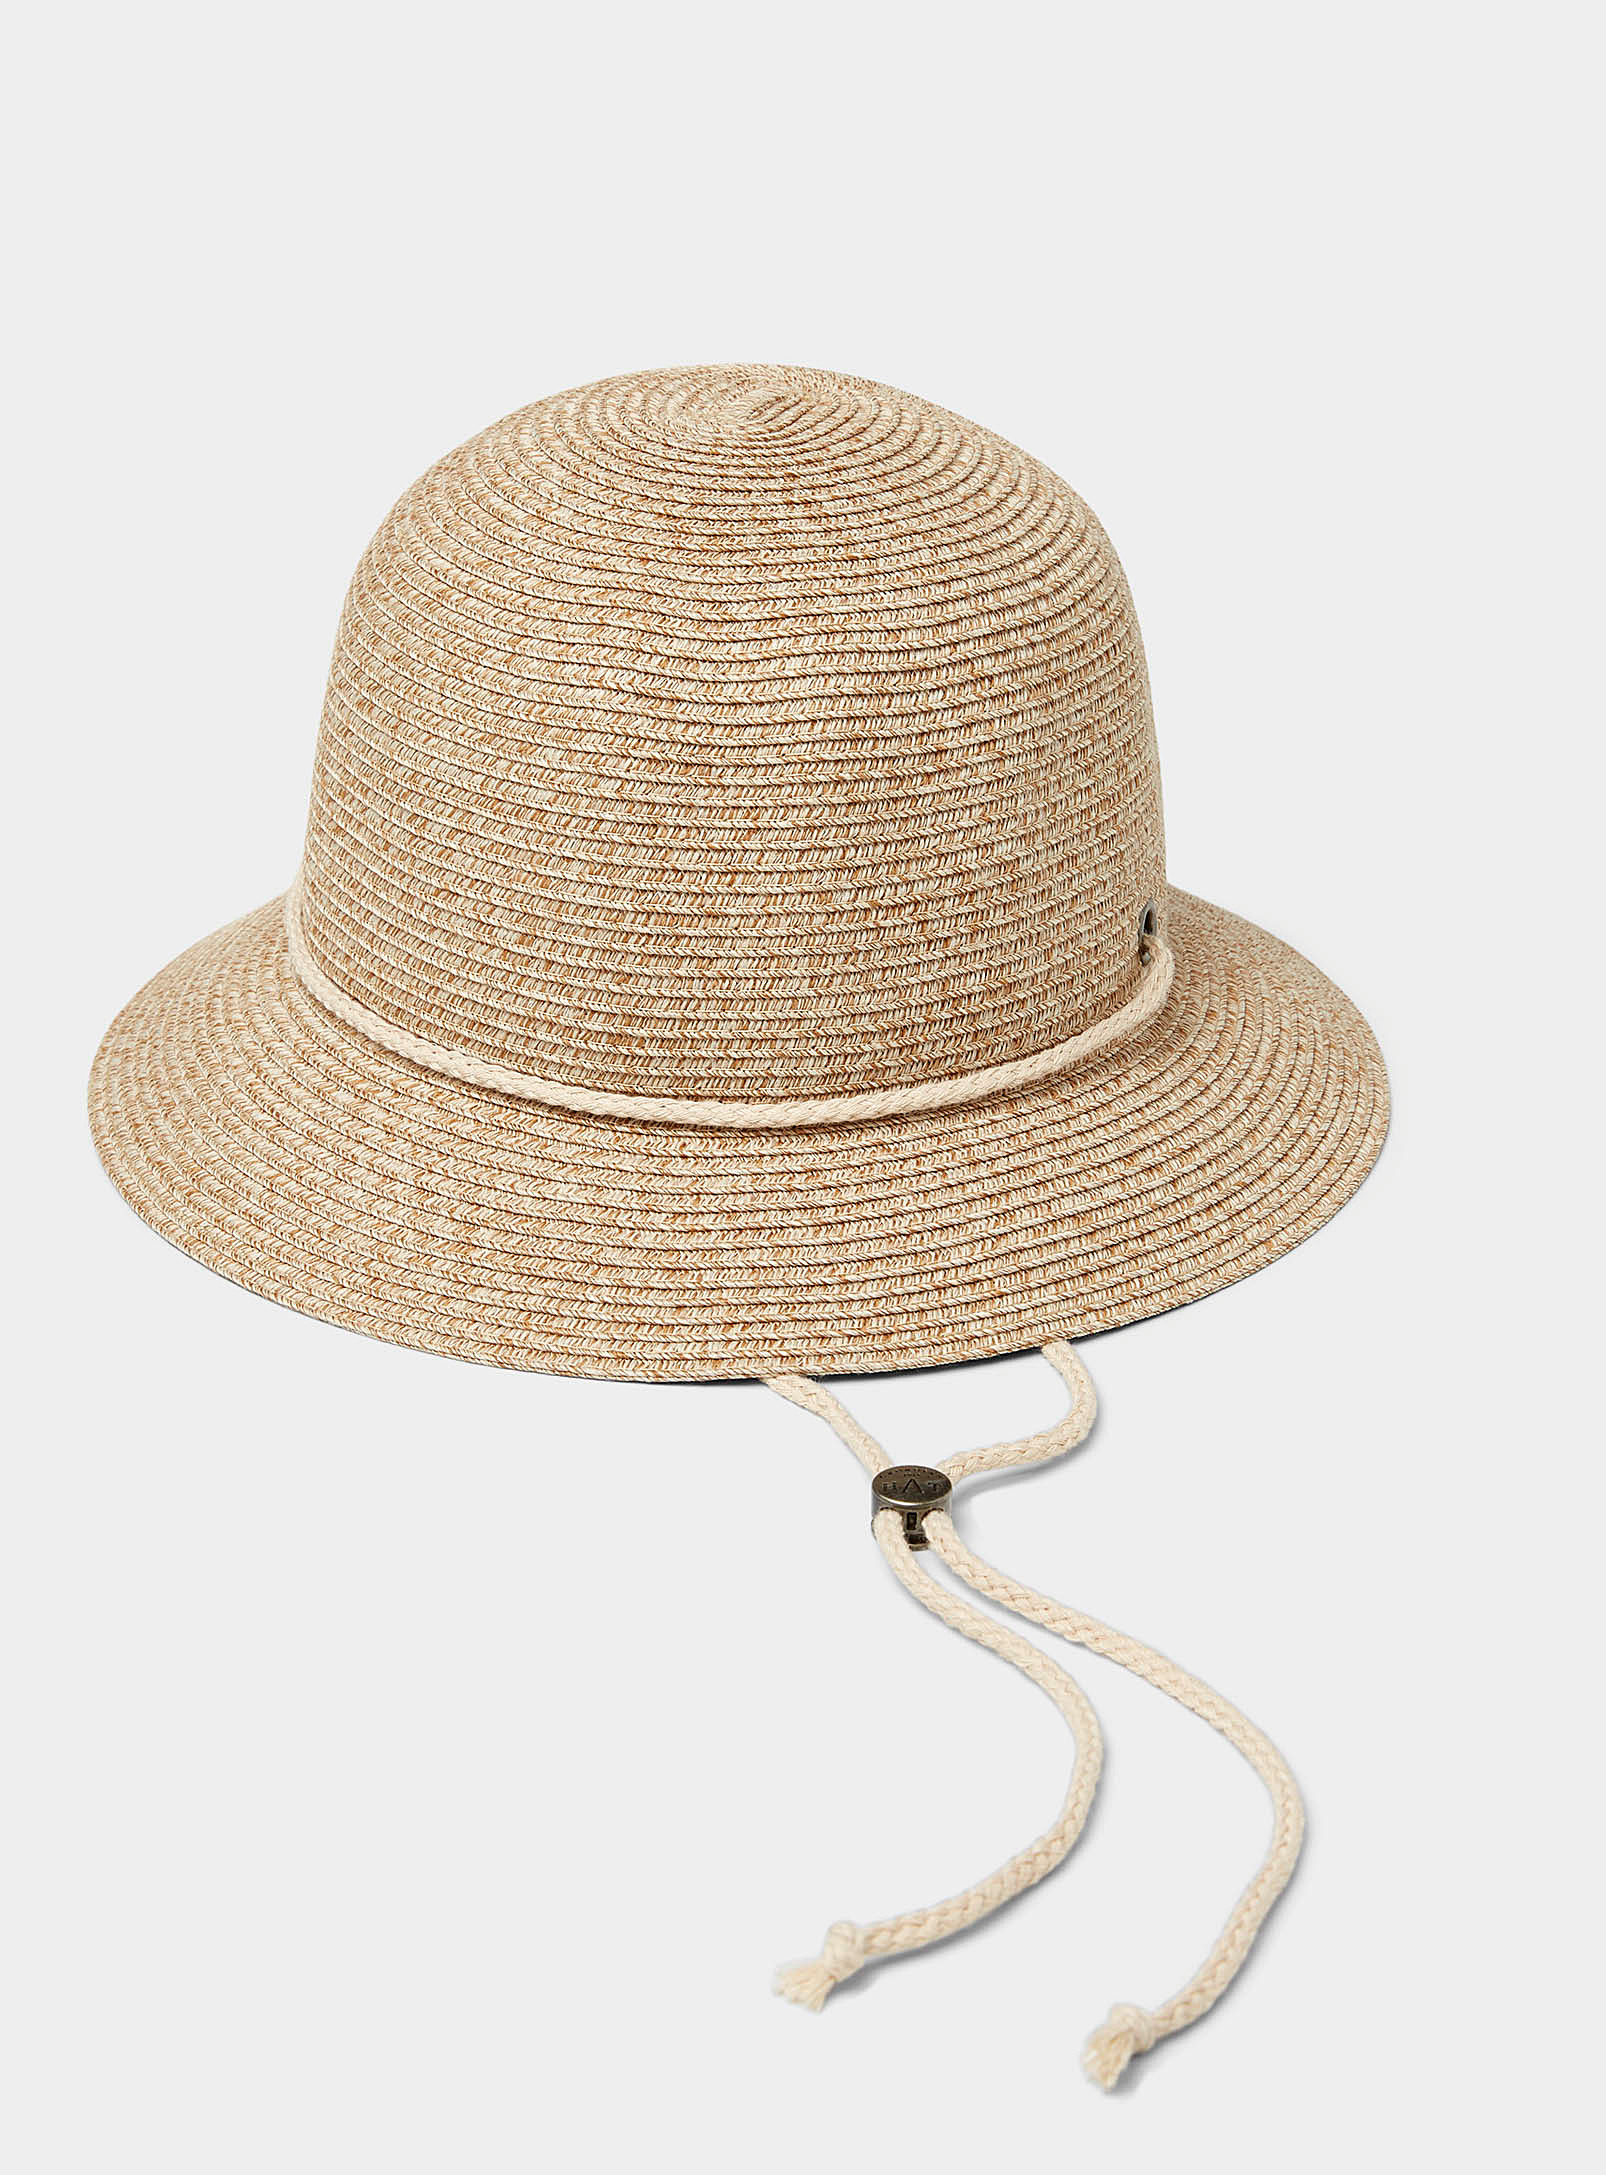 Canadian Hat Corded Straw-like Cloche In Neutral